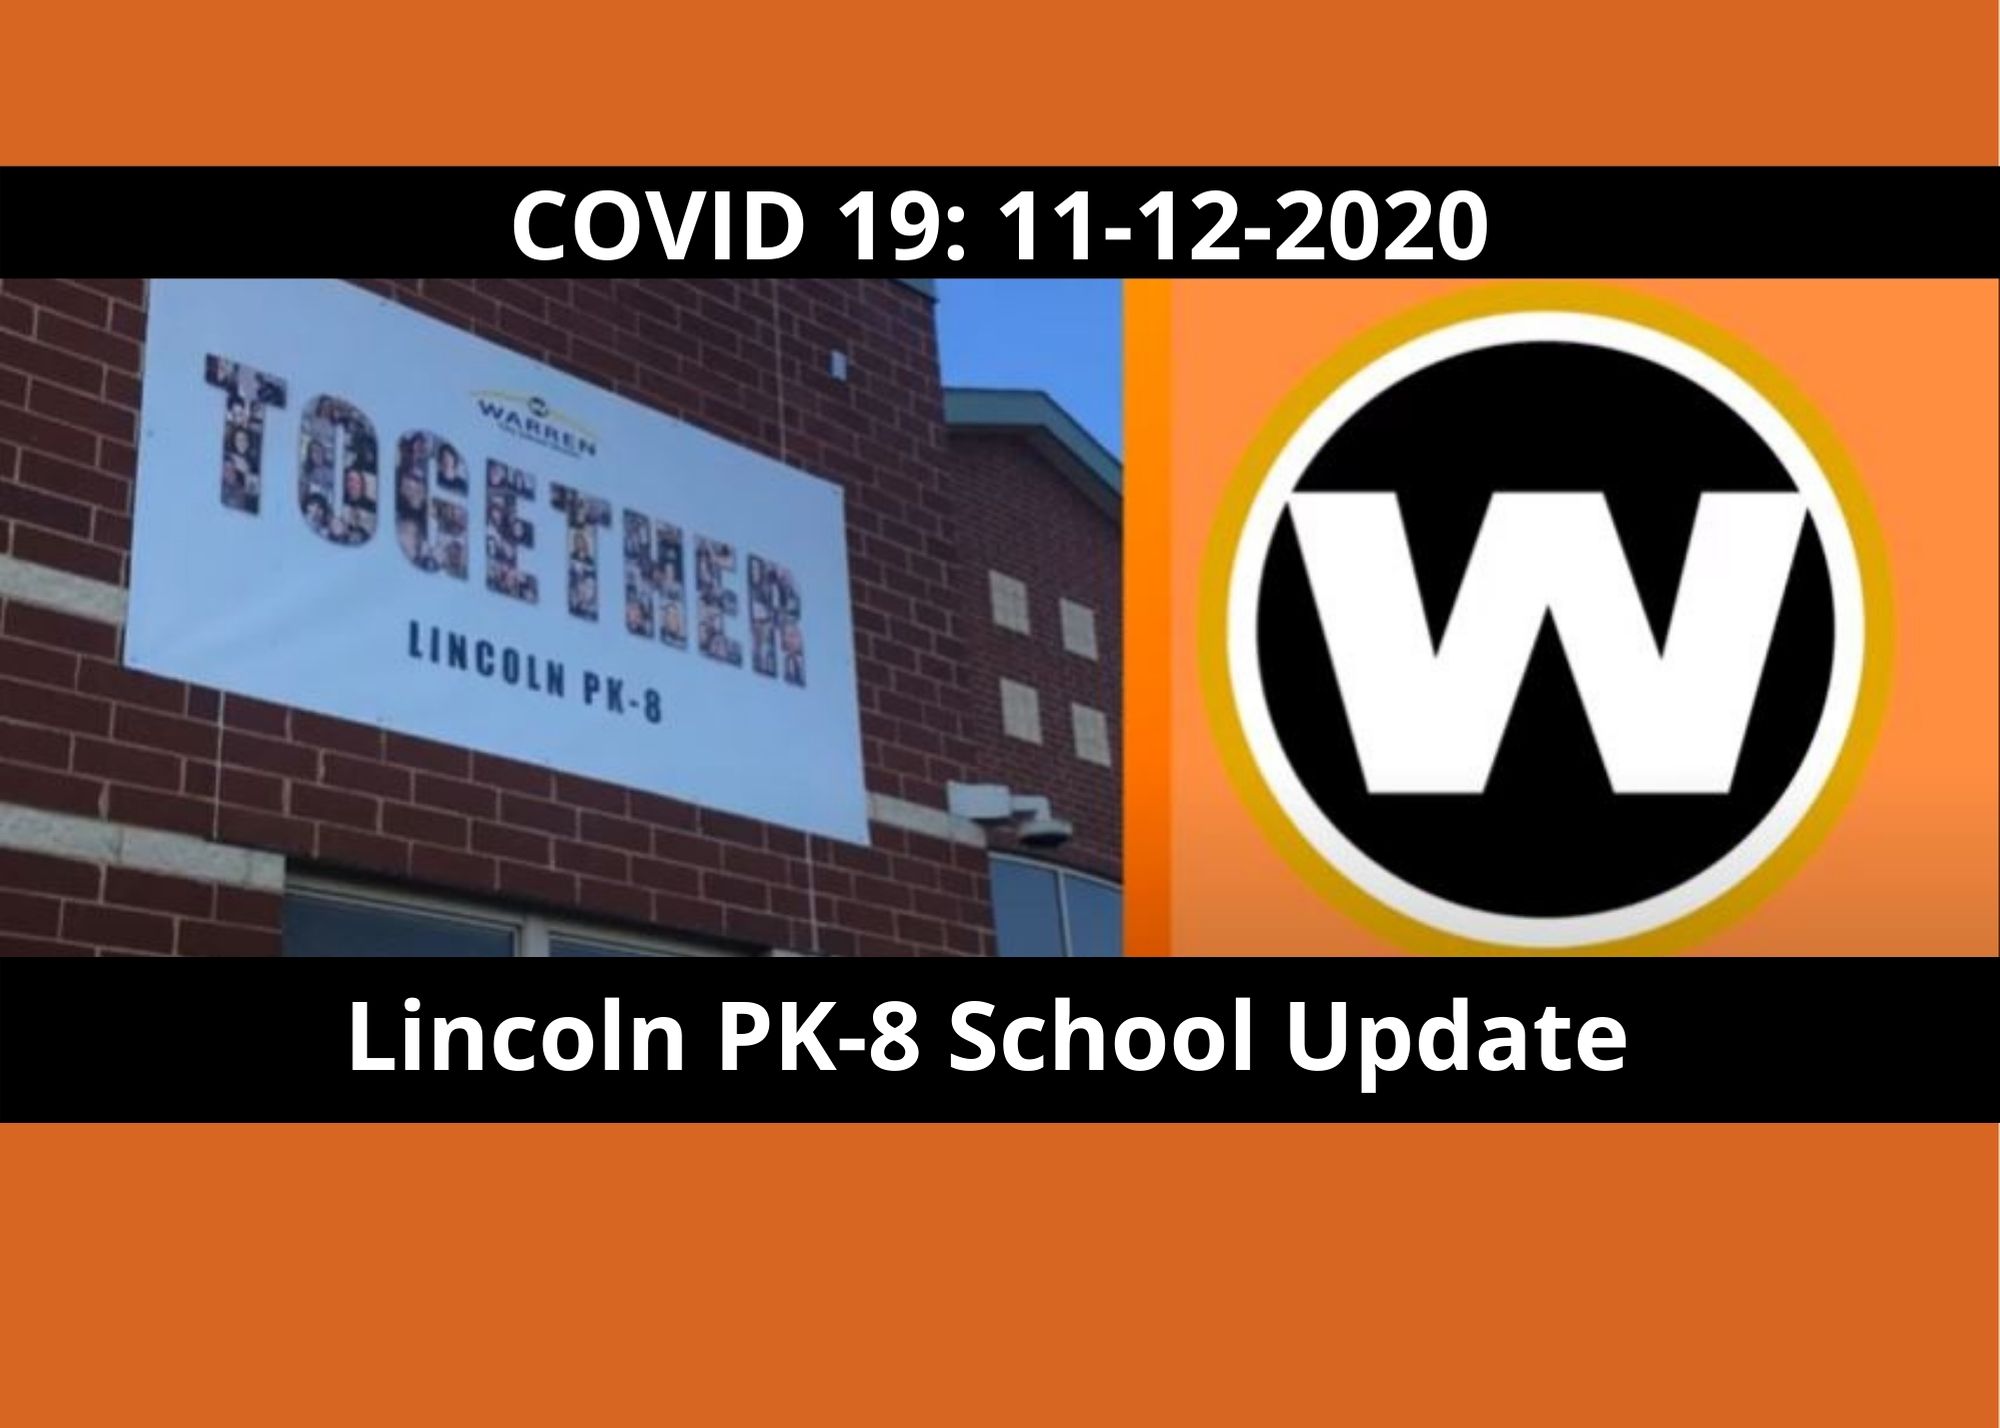 Lincoln PK-8 Employee tests positive for COVID-19